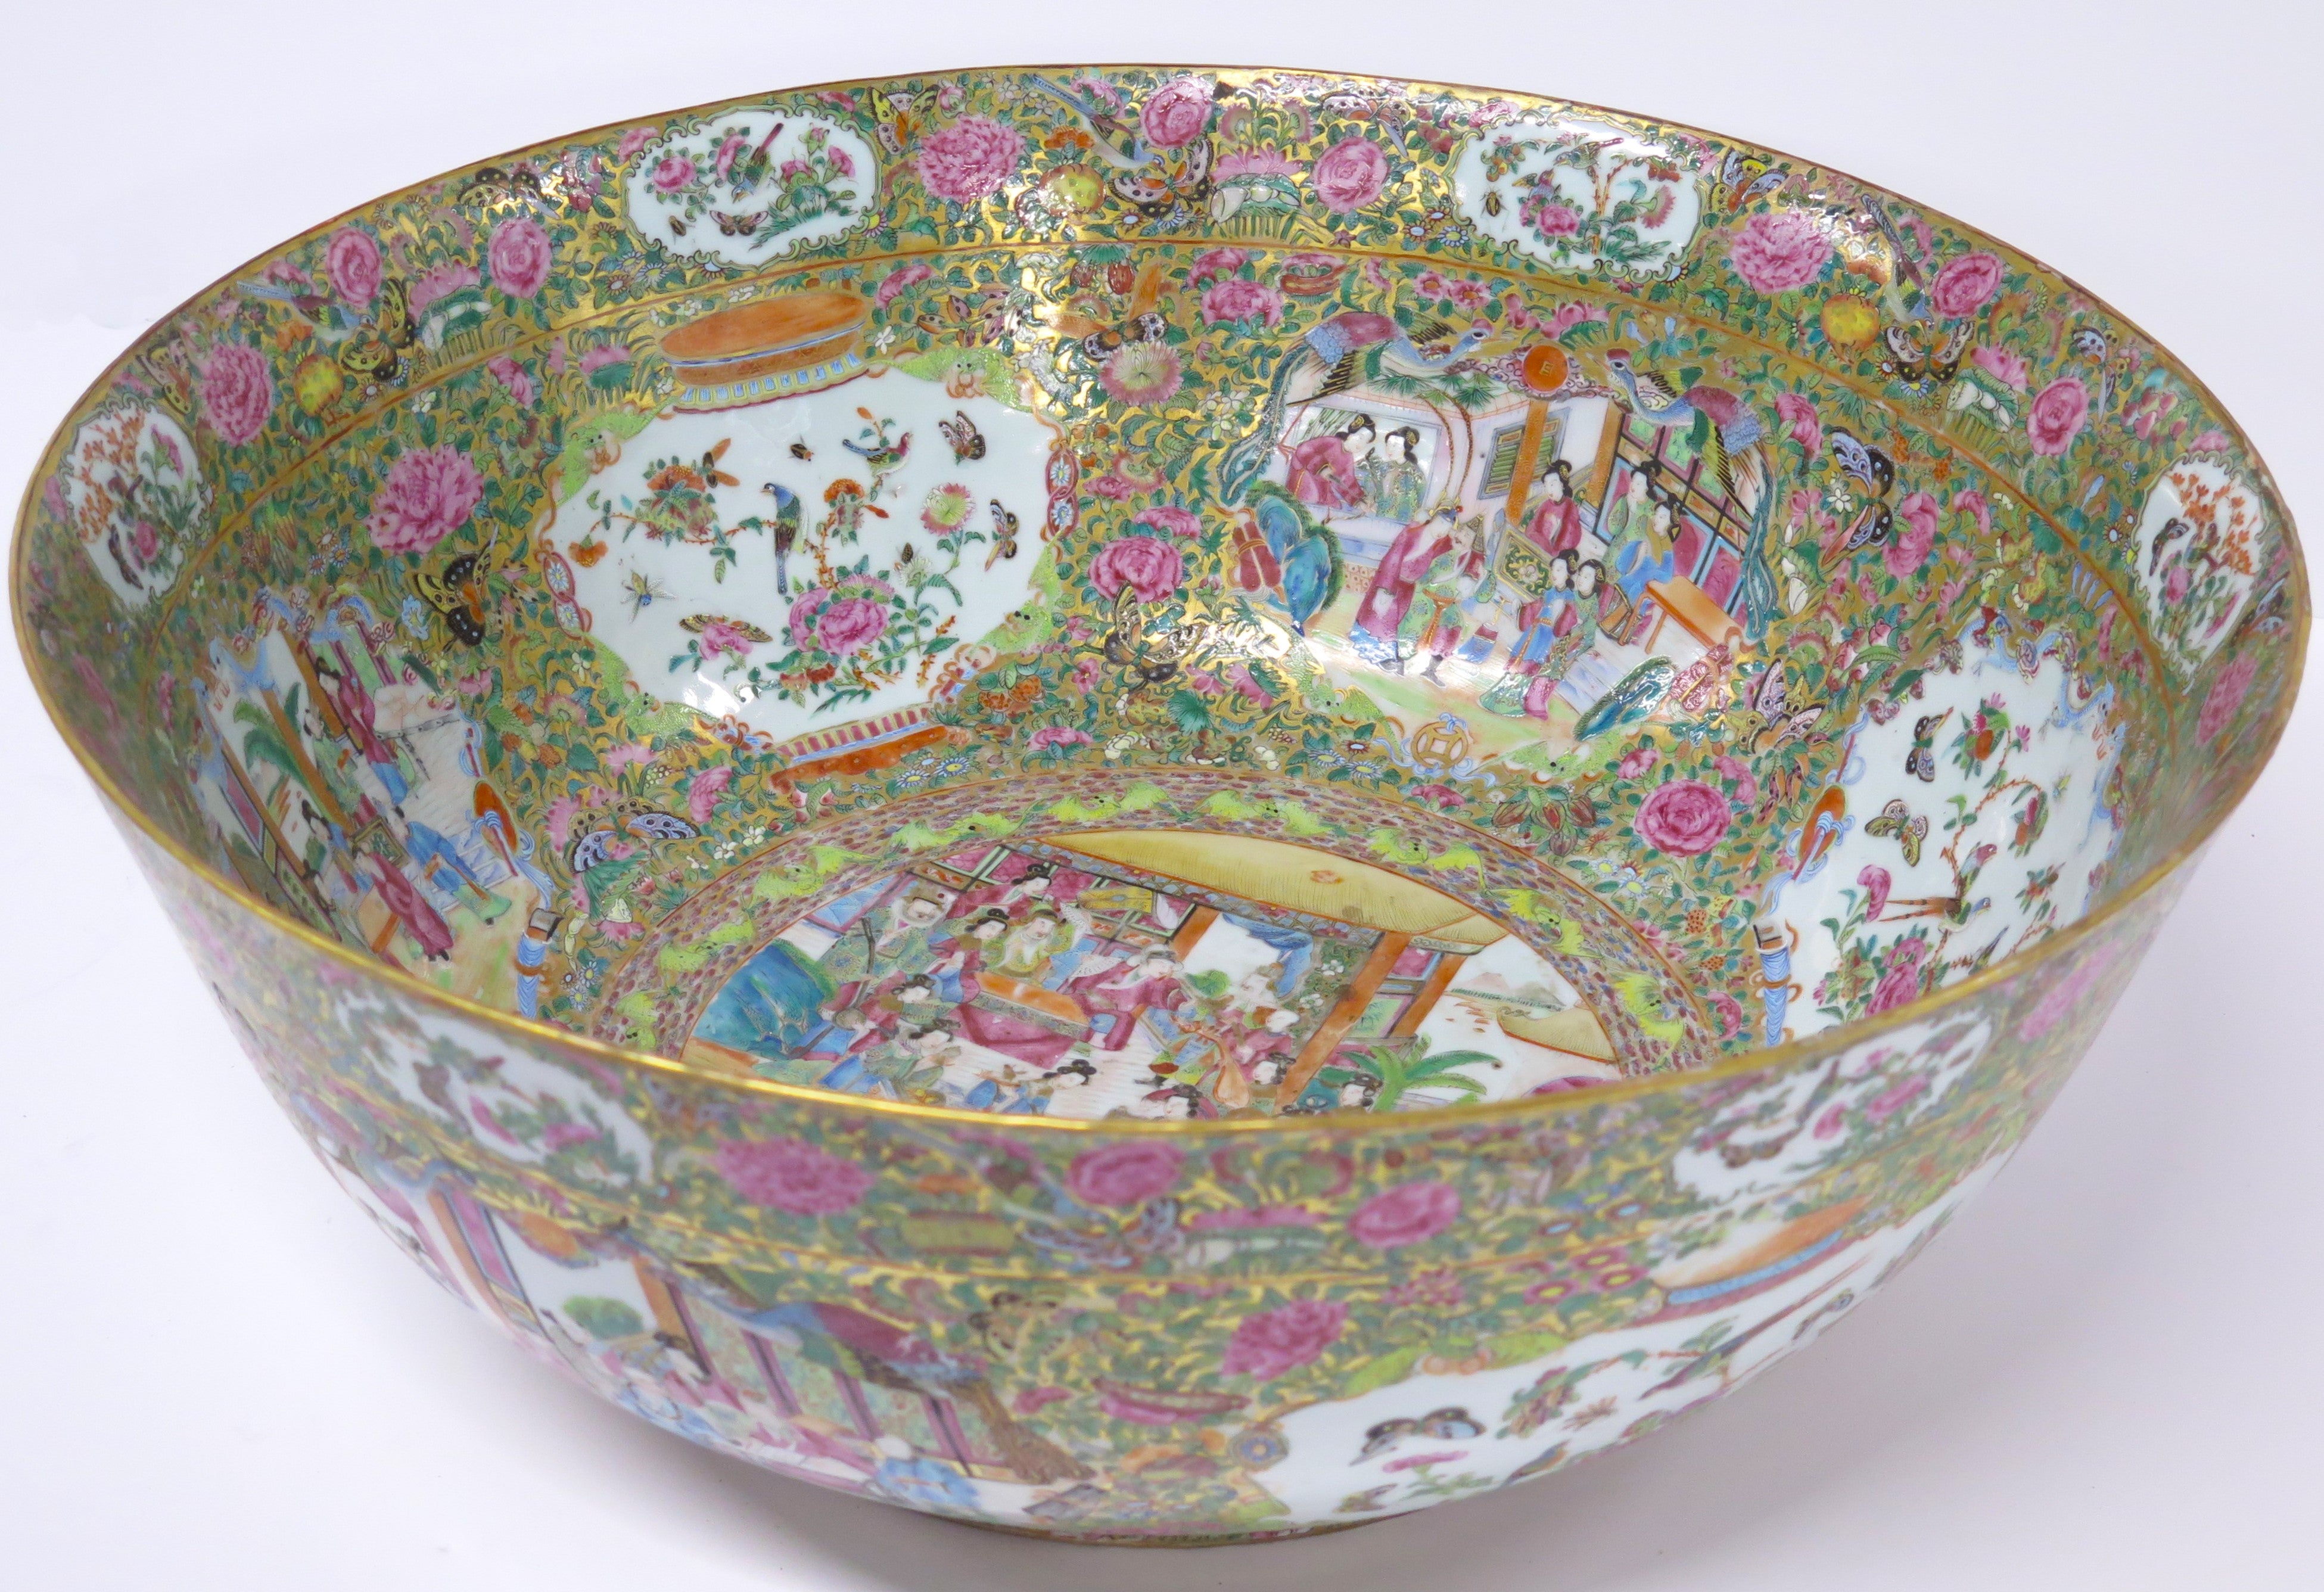 A Monumental (23.25" Diameter) Chinese Export Rose Medallion Punch Bowl